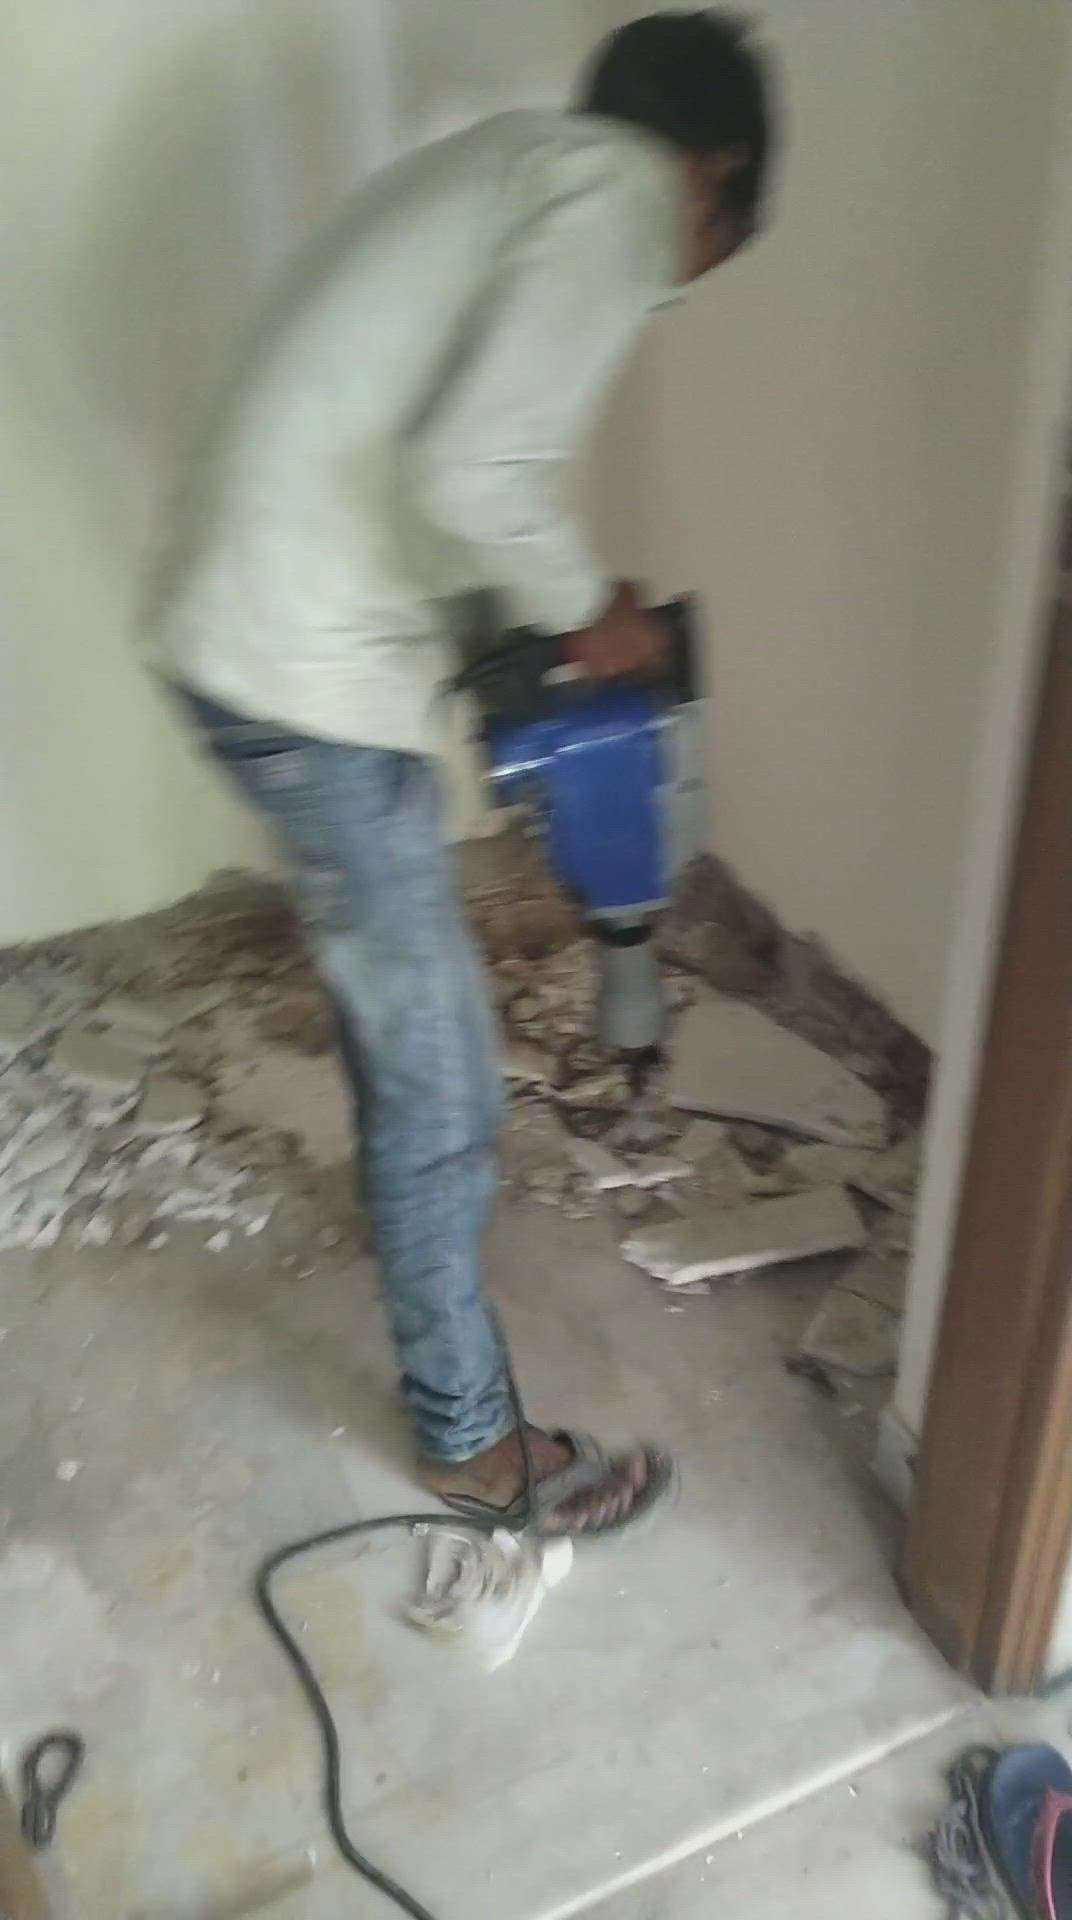 #HouseRenovation #liftconstruction #renovatehome  #Renovationwork #SmallBudgetRenovation #BathroomRenovation #KitchenRenovation #bashroom-renovation 

House renovation work and lift shaft renovation work under construction.contact for any fresh and renovation construction work on 9625299255.